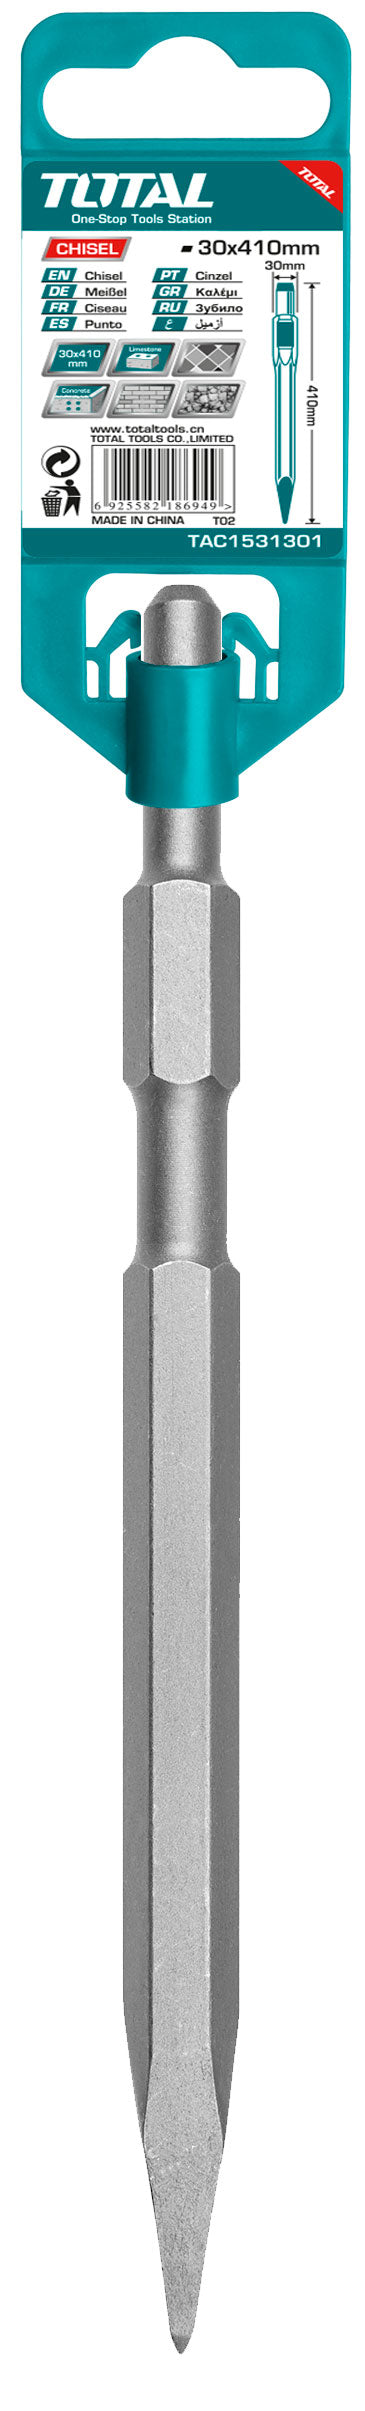 Total Hex chisel 17X280mm pointed TAC153171